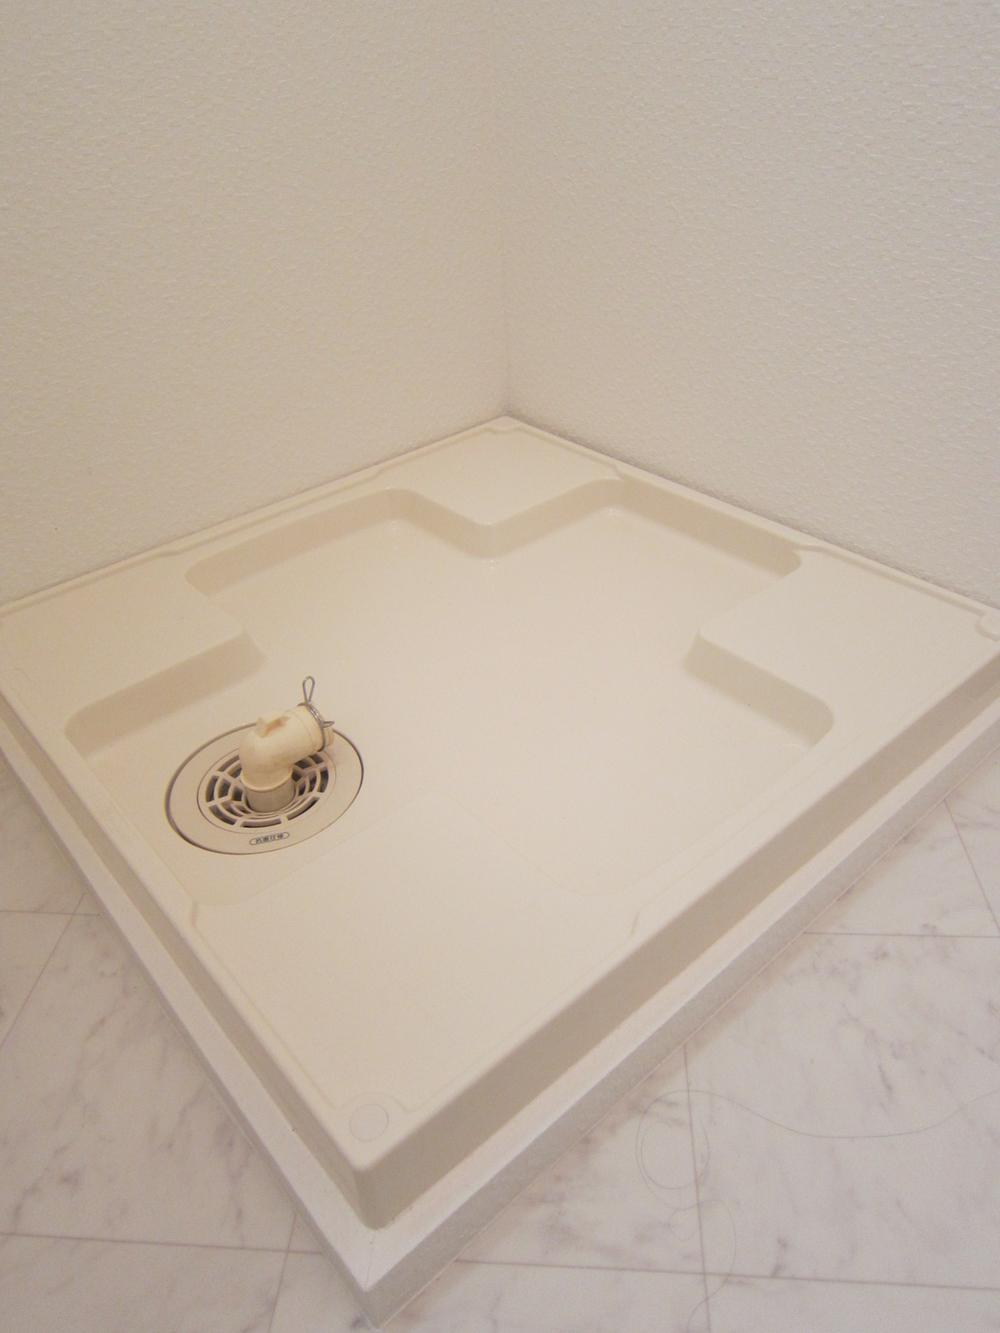 Wash basin, toilet. Waterproof bread of the vertical drum washing machine that can be installed 64 × 64 cm wide.  Indoor (10 May 2013) Shooting